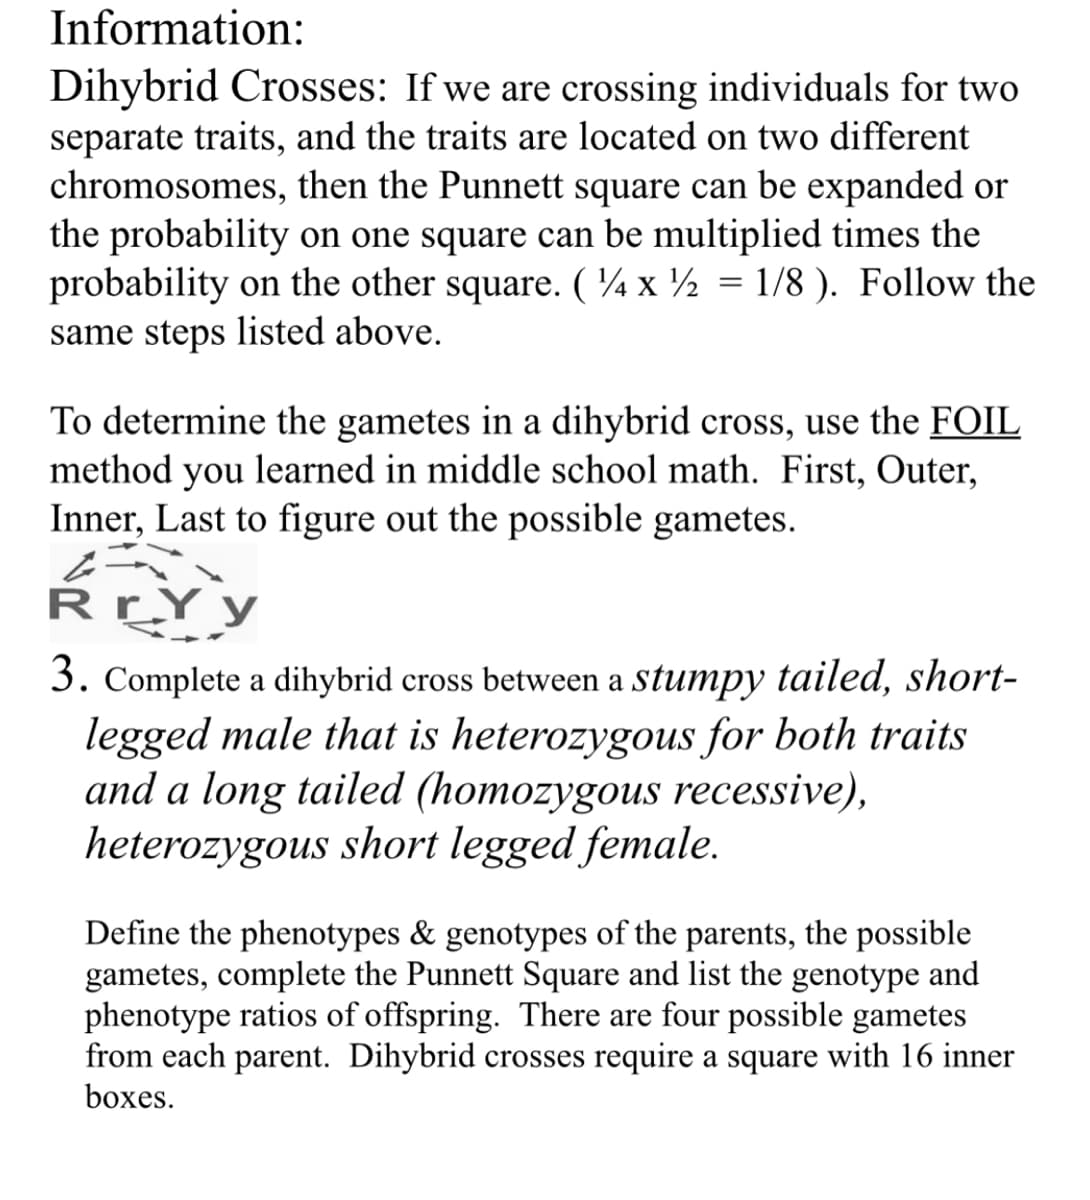 Information:
Dihybrid Crosses: If we are crossing individuals for two
separate traits, and the traits are located on two different
chromosomes, then the Punnett square can be expanded or
the probability on one square can be multiplied times the
probability on the other square. ( ¼ x ½ = 1/8 ). Follow the
same steps listed above.
To determine the gametes in a dihybrid cross, use the FOIL
method you learned in middle school math. First, Outer,
Inner, Last to figure out the possible gametes.
RrYy
3. Complete a dihybrid cross between a stumpy tailed, short-
legged male that is heterozygous for both traits
and a long tailed (homozygous recessive),
heterozygous short legged female.
Define the phenotypes & genotypes of the parents, the possible
gametes, complete the Punnett Square and list the genotype and
phenotype ratios of offspring. There are four possible gametes
from each parent. Dihybrid crosses require a square with 16 inner
boxes.
